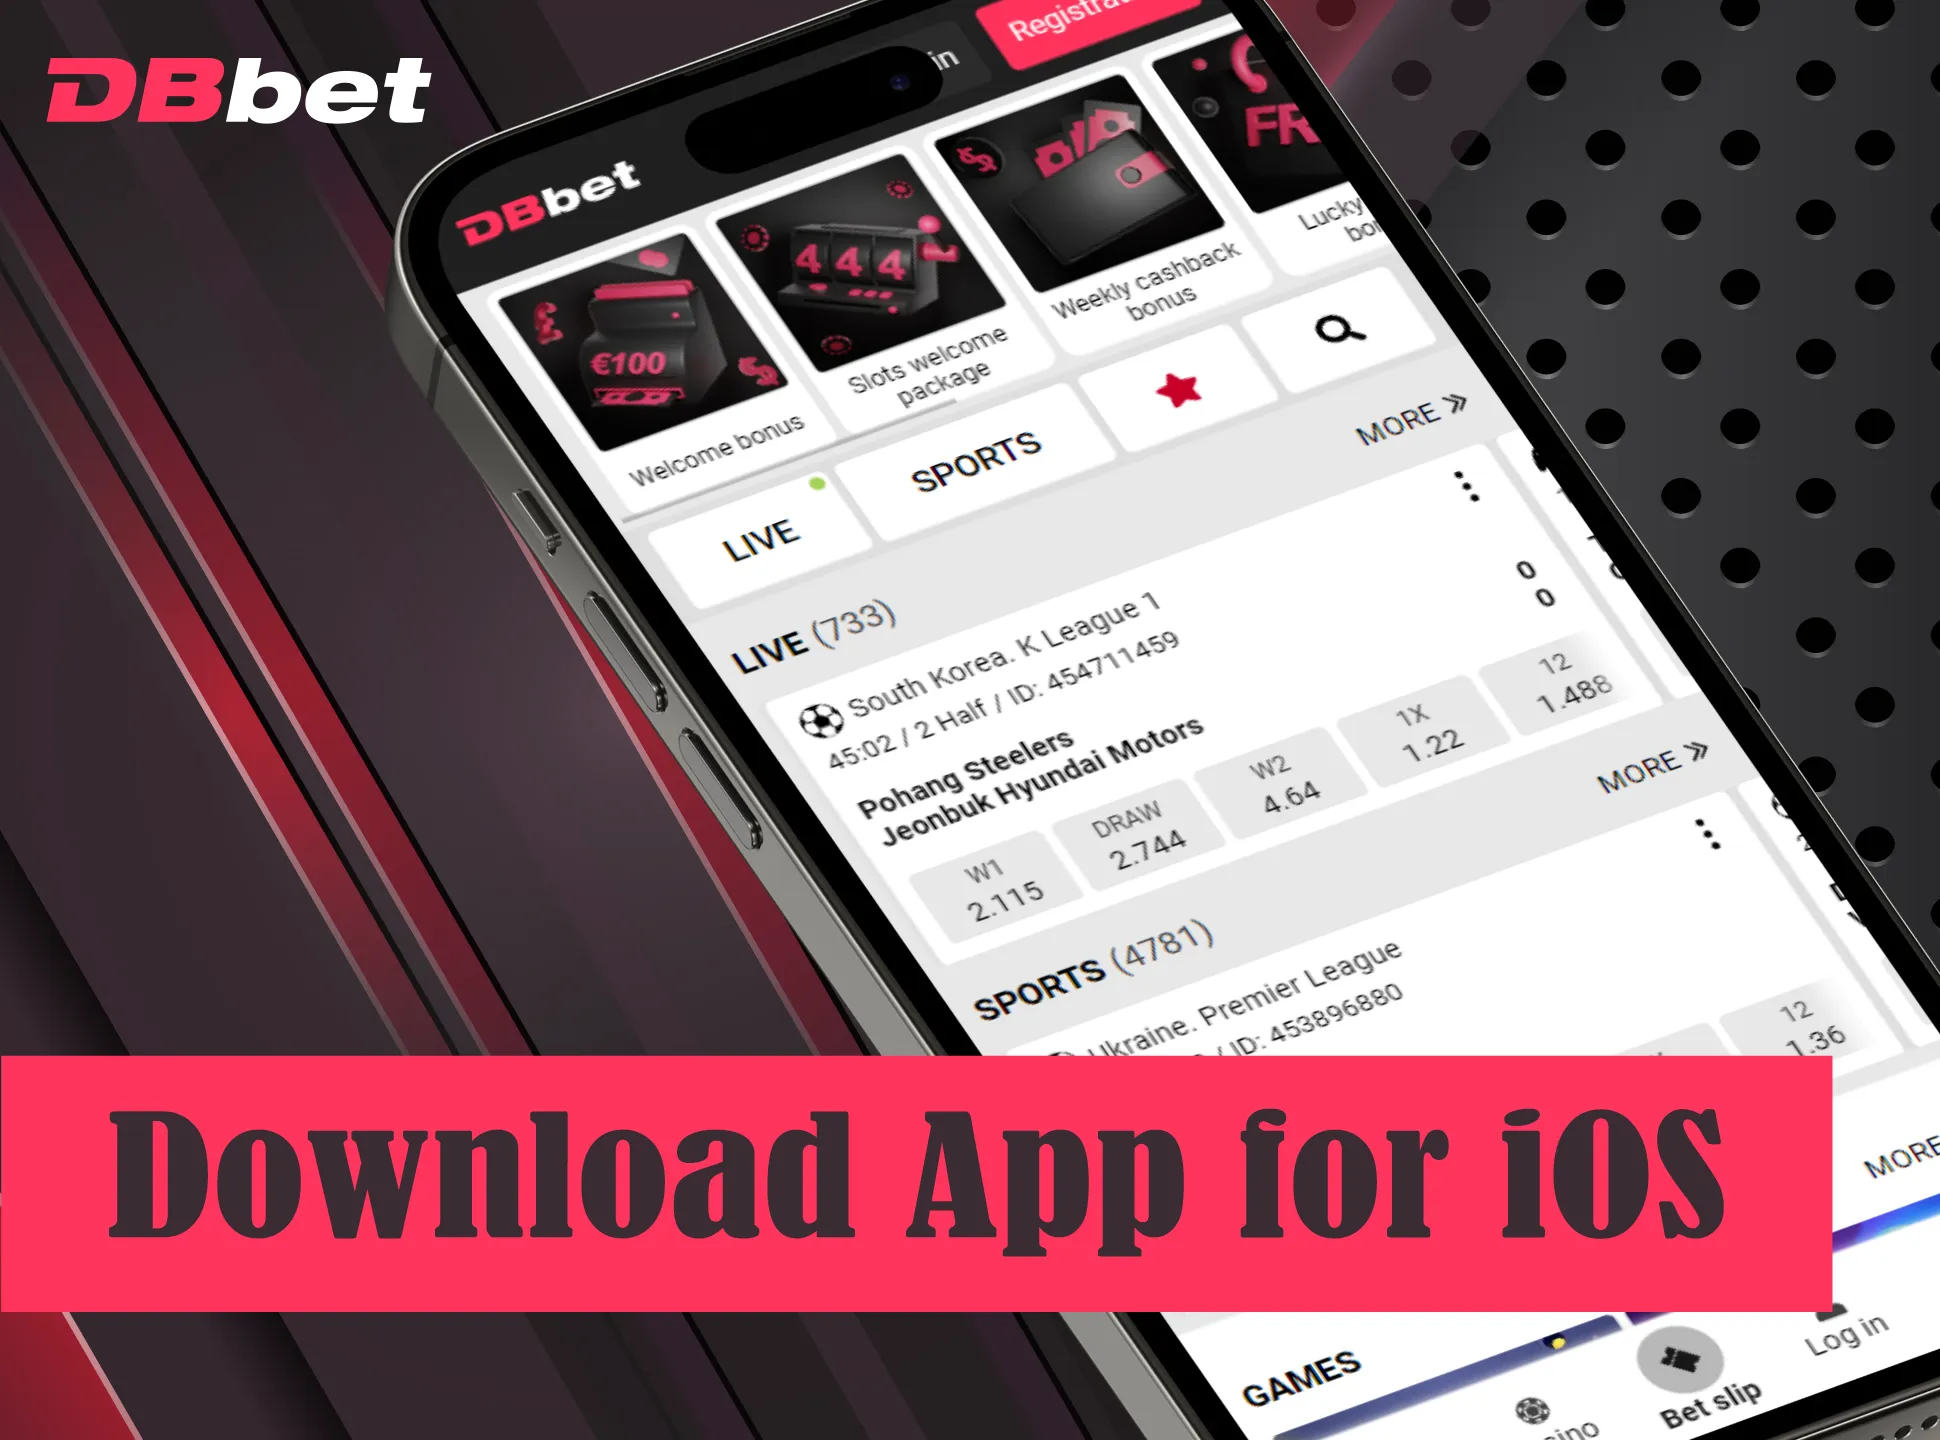 Download and install DBbet iOS app on your device.